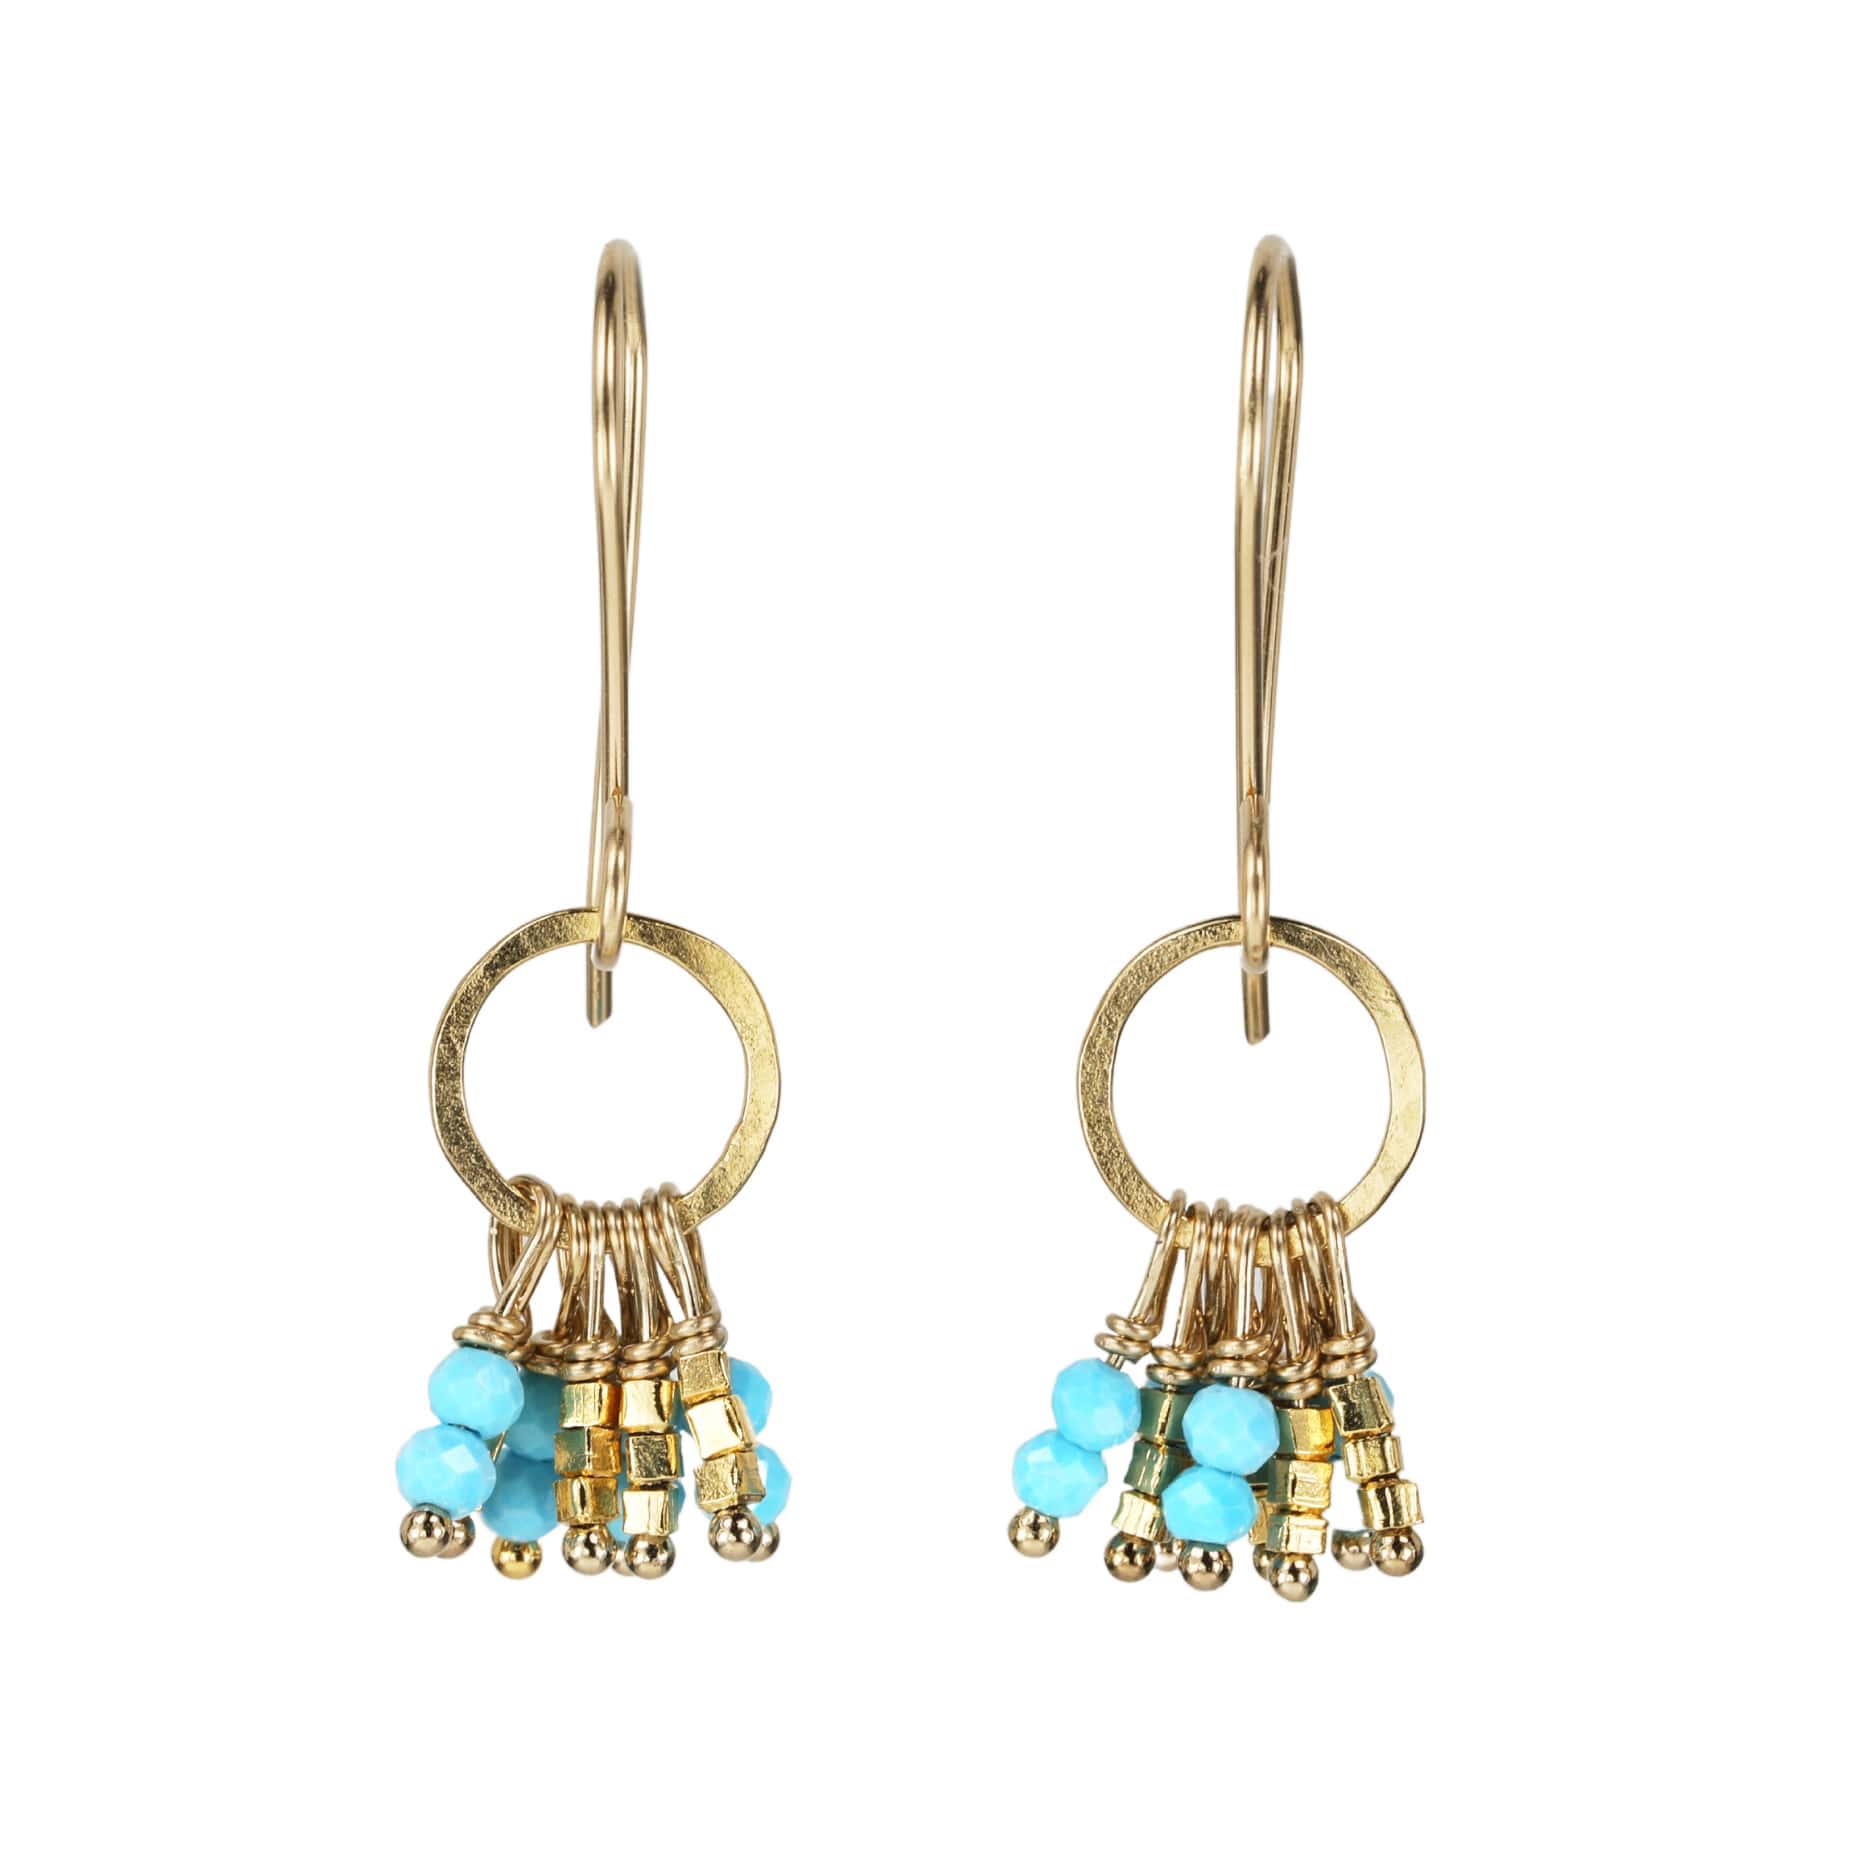 Debbie Fisher Gold Vermeil Circular Drop Earrings with Turquoise and Gold Beaded Fringe